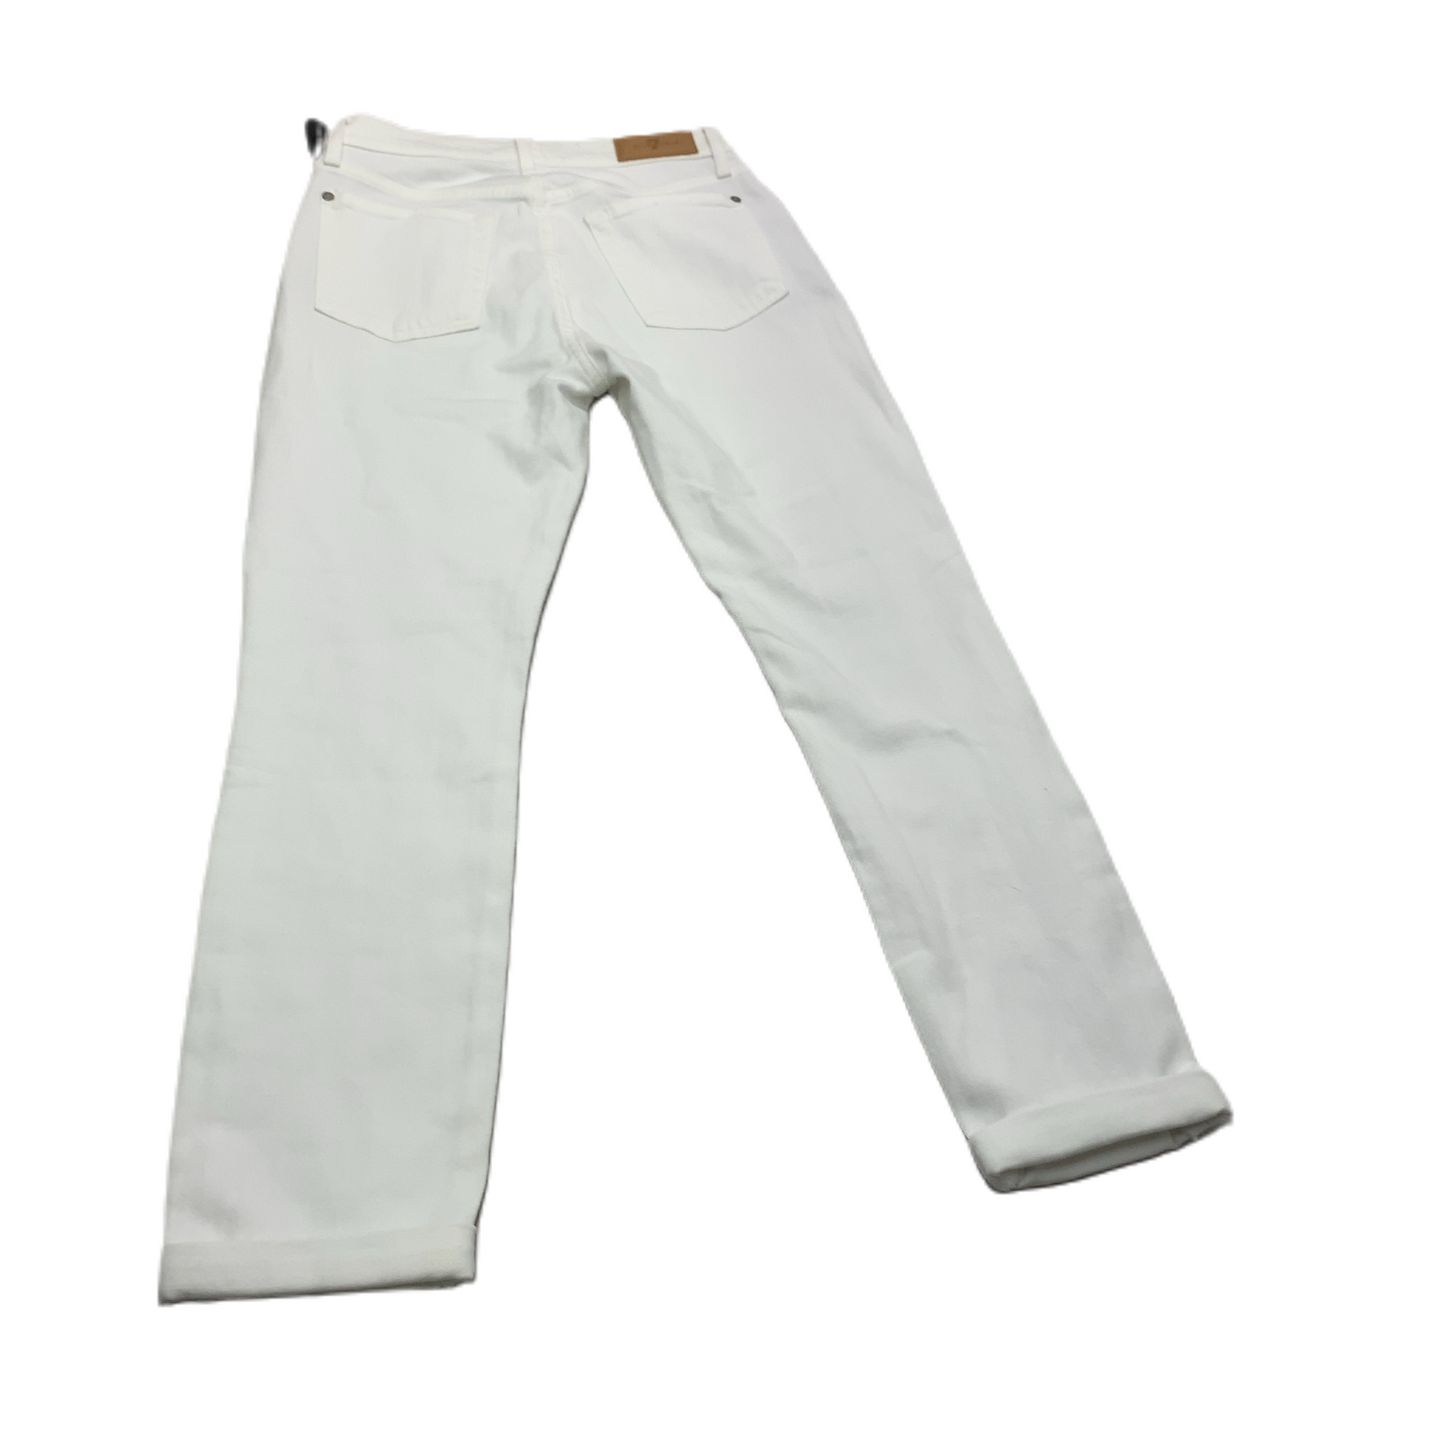 White  Pants Designer By 7 For All Mankind  Size: 0